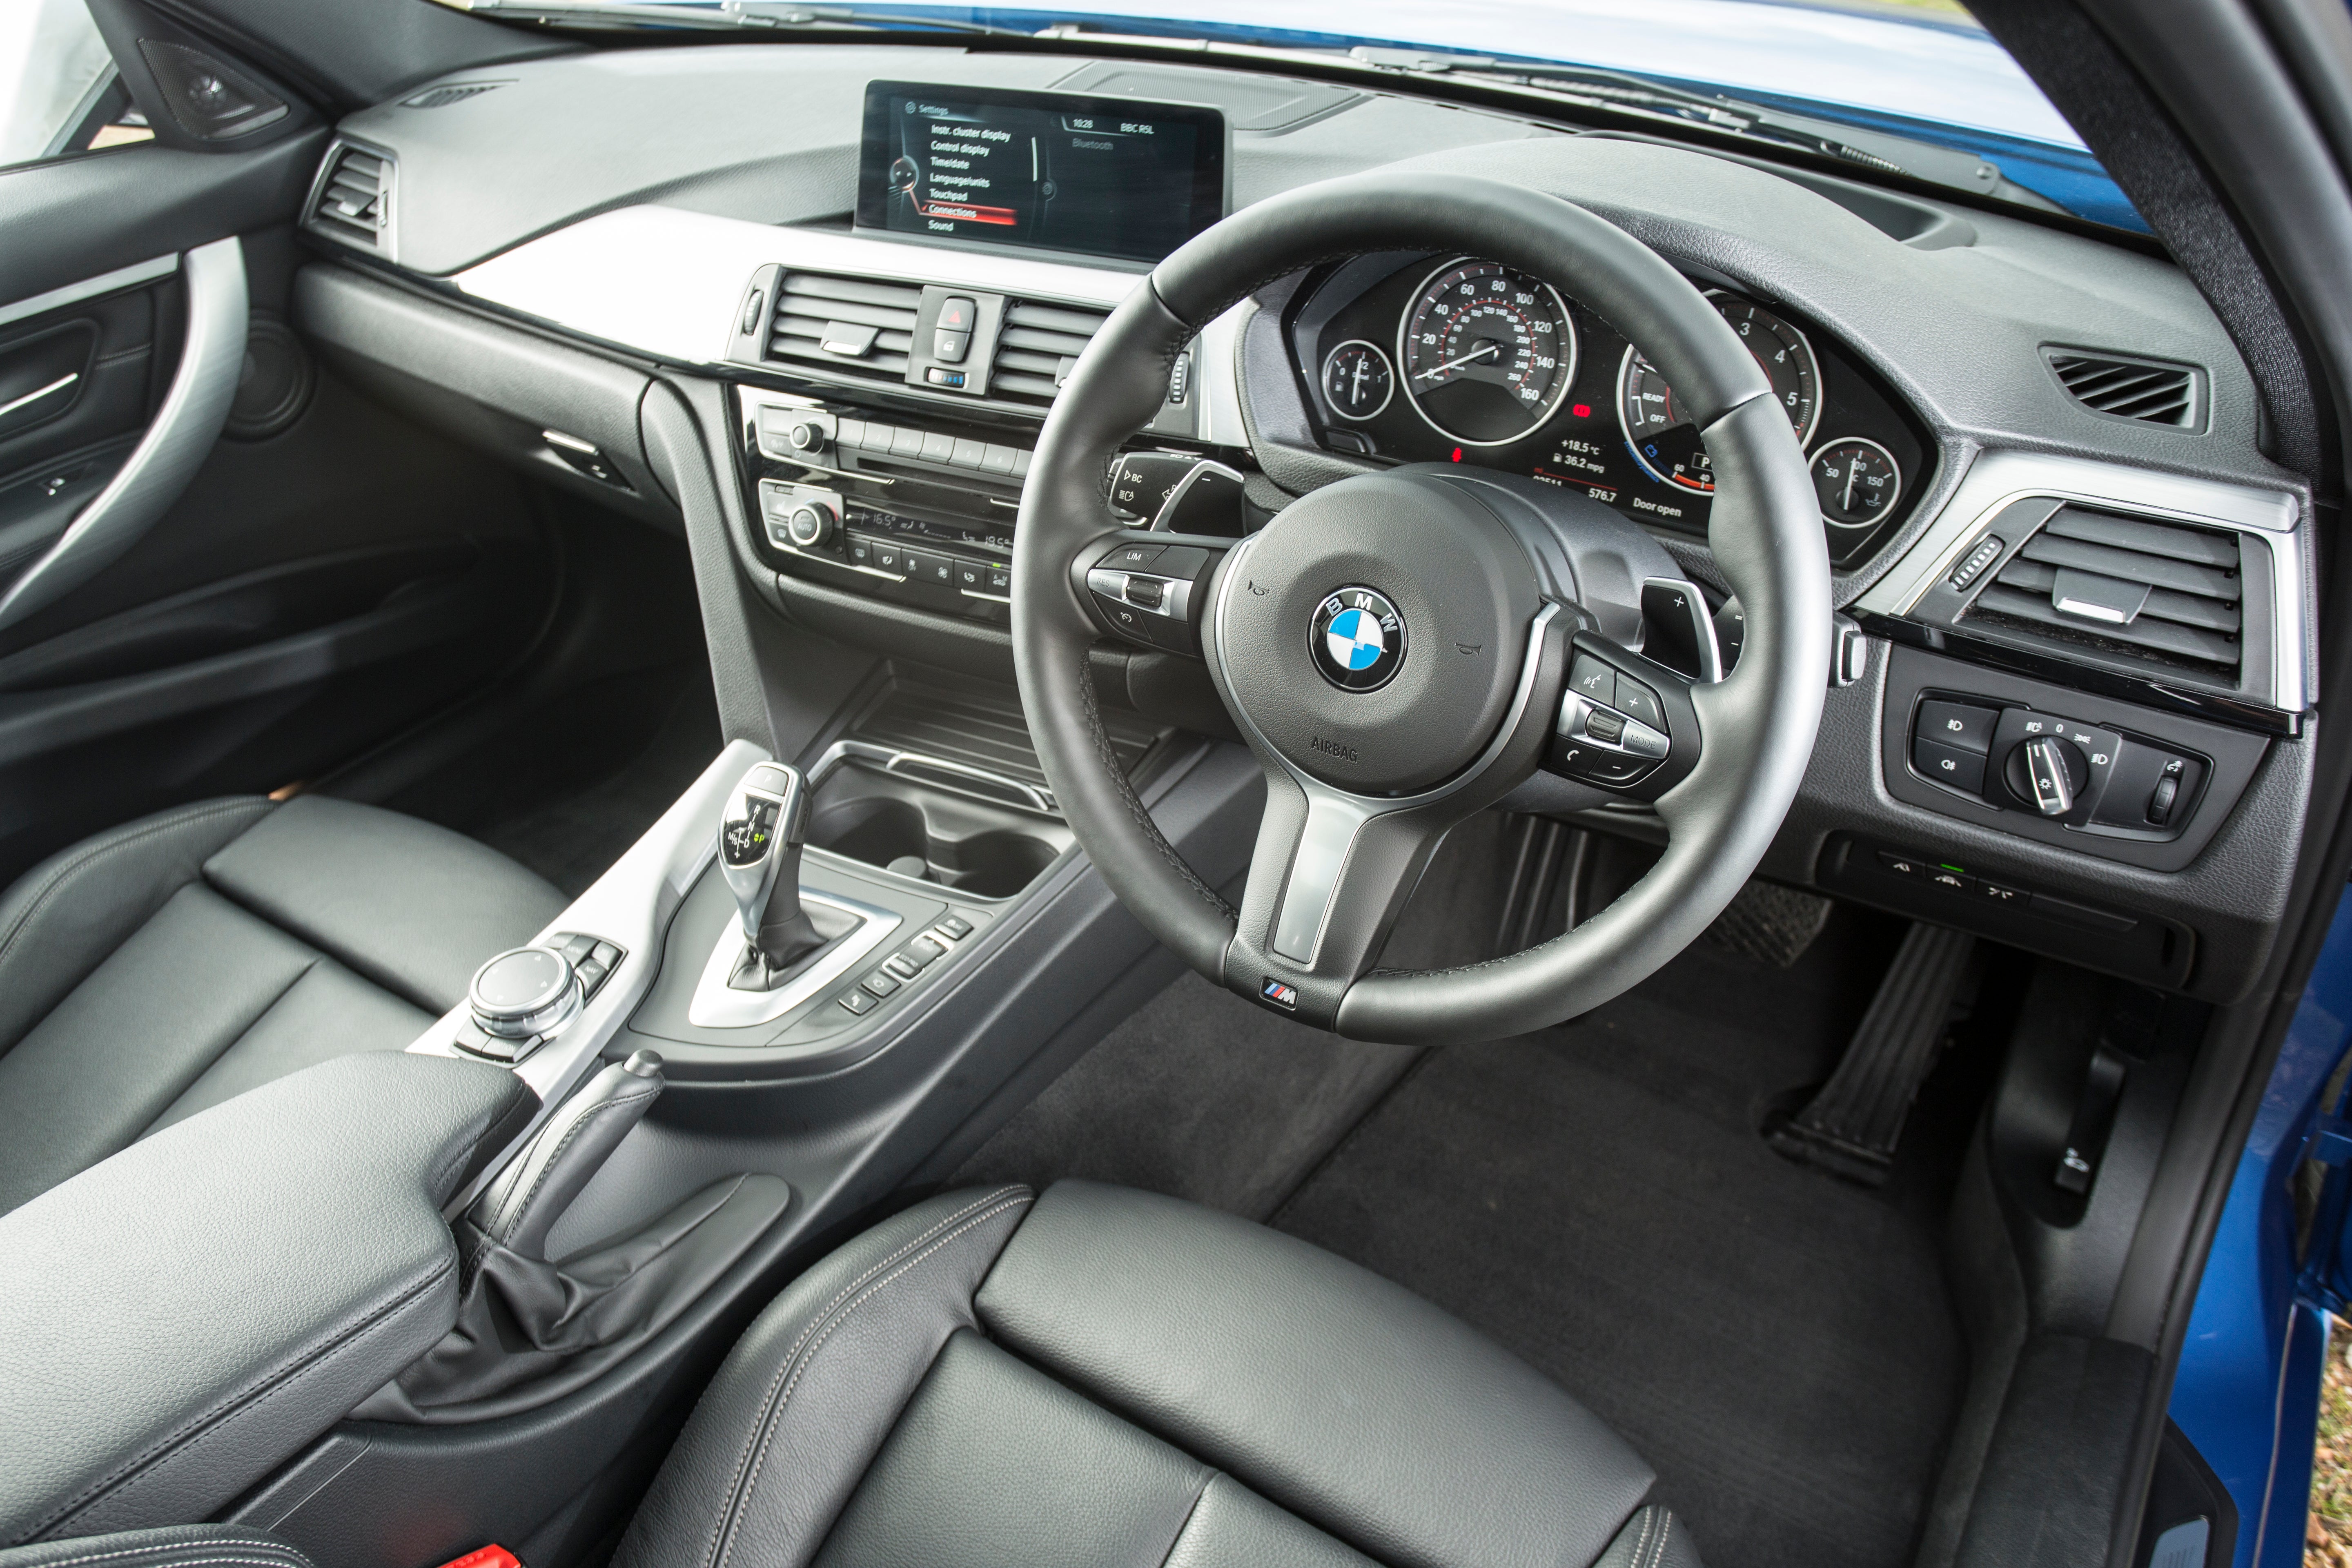 BMW 3 Series Touring (2012-2019) Review